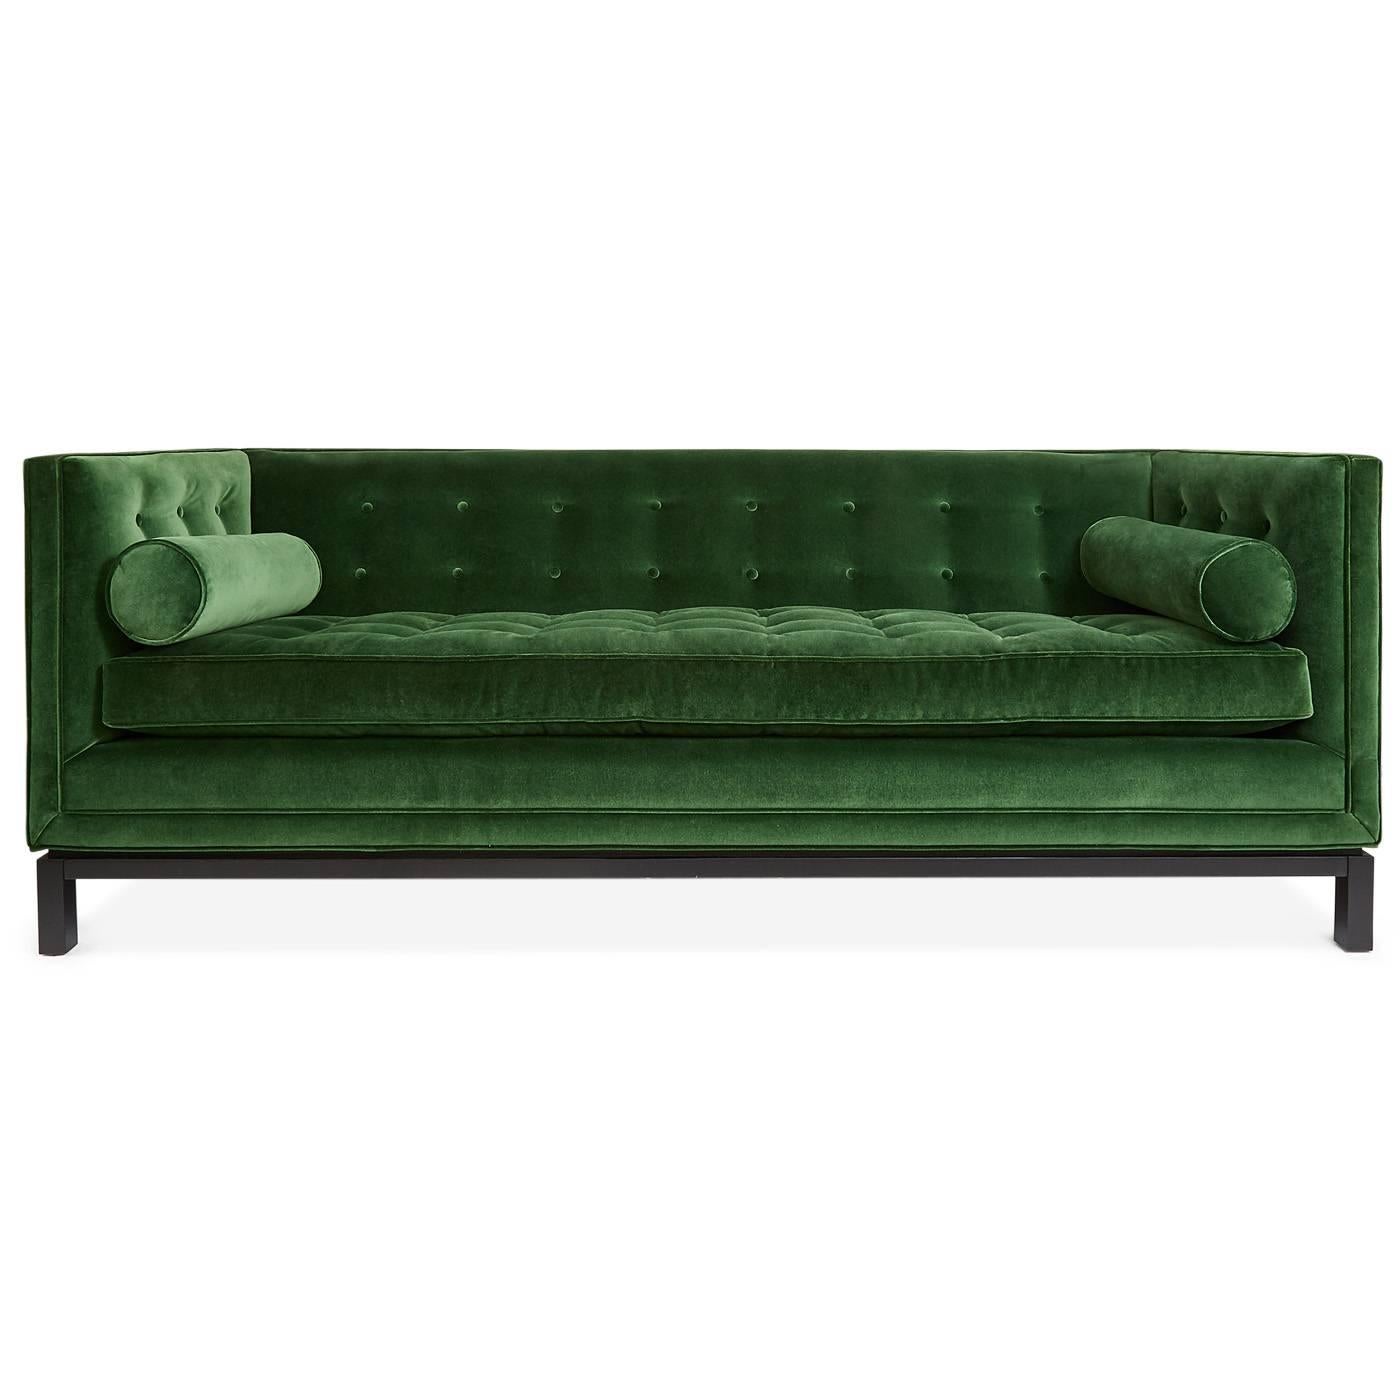 Signature Style. Our Lampert Sofa hits all the right notes—the high tuxedo back gives it an elegant yet formal presence, while the bolsters make it super comfy. Venice Emerald upholstery with black base oozes moody Chinoise elegance. Contact Dealer